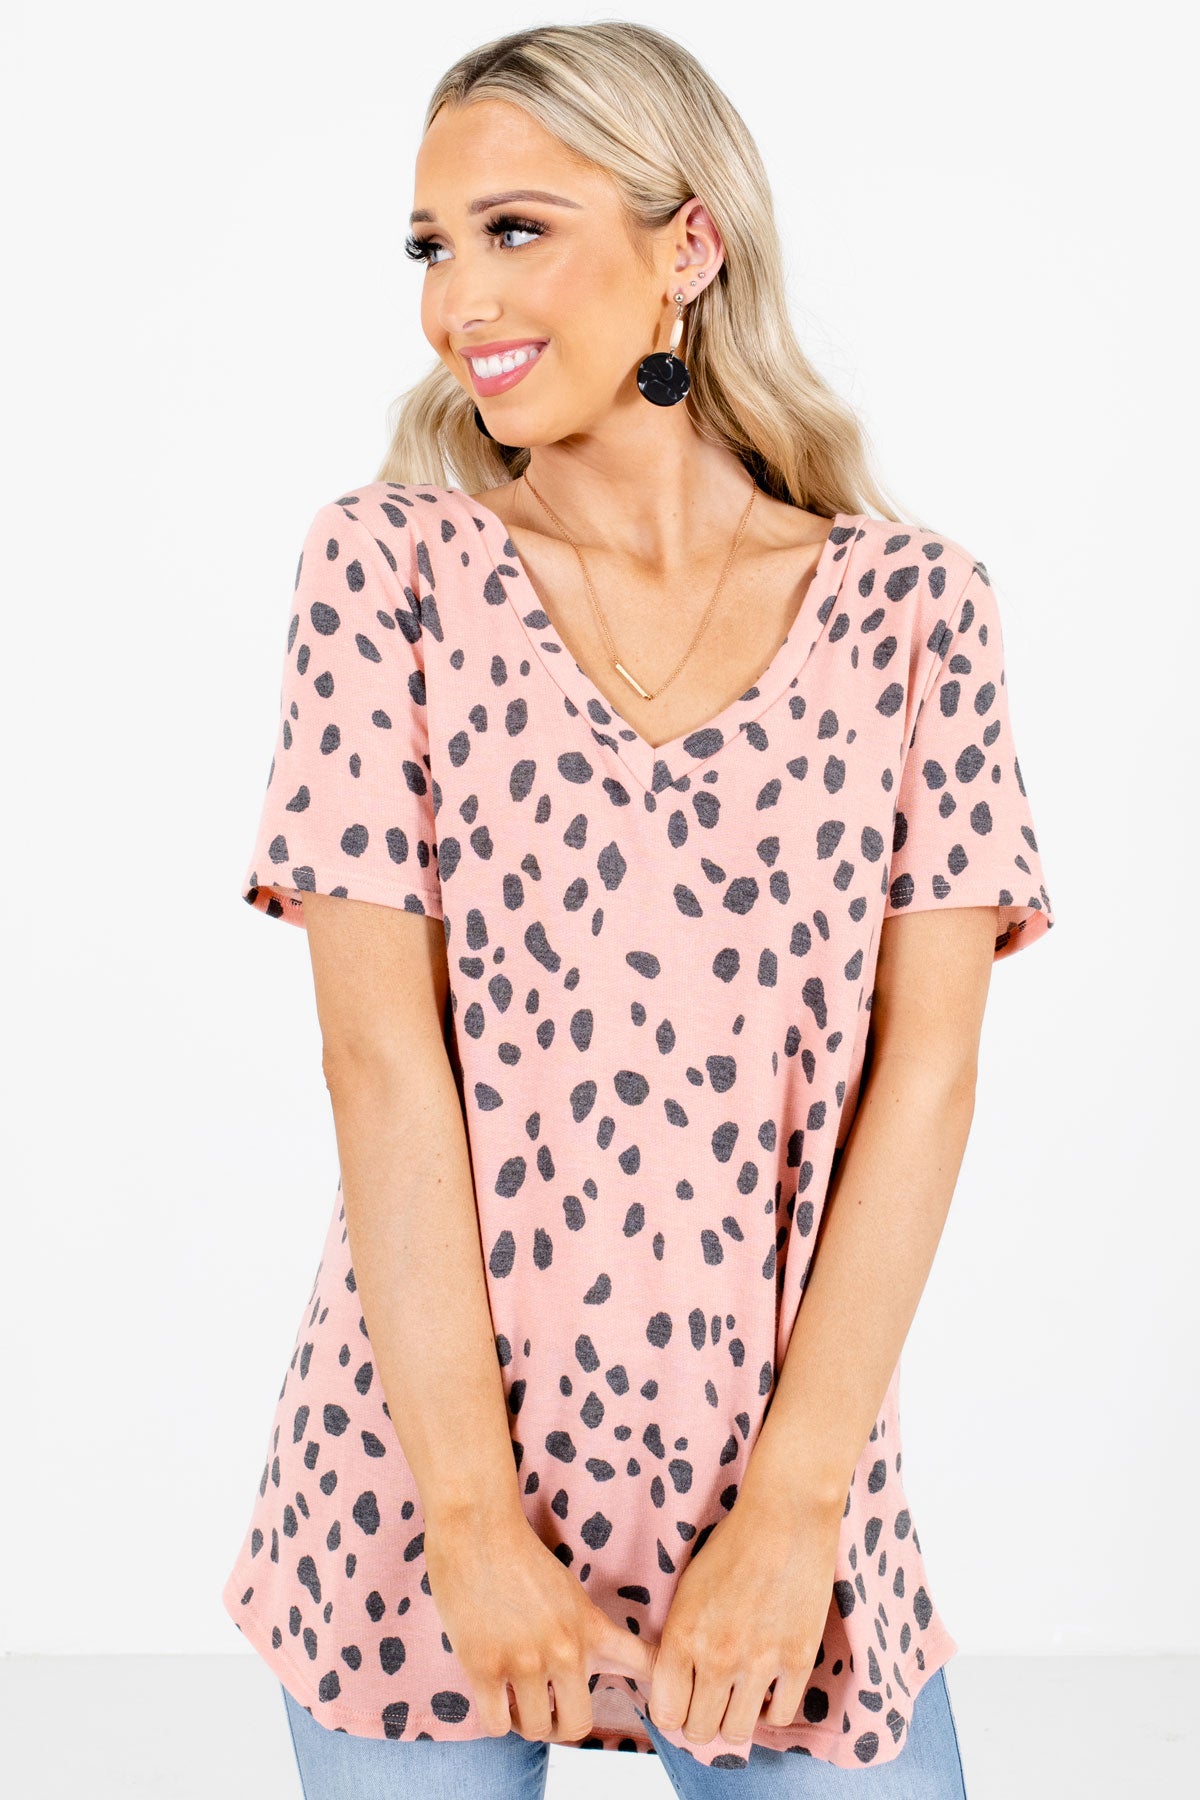 Pink Abstract Polka Dot Patterned Boutique Tops for Women